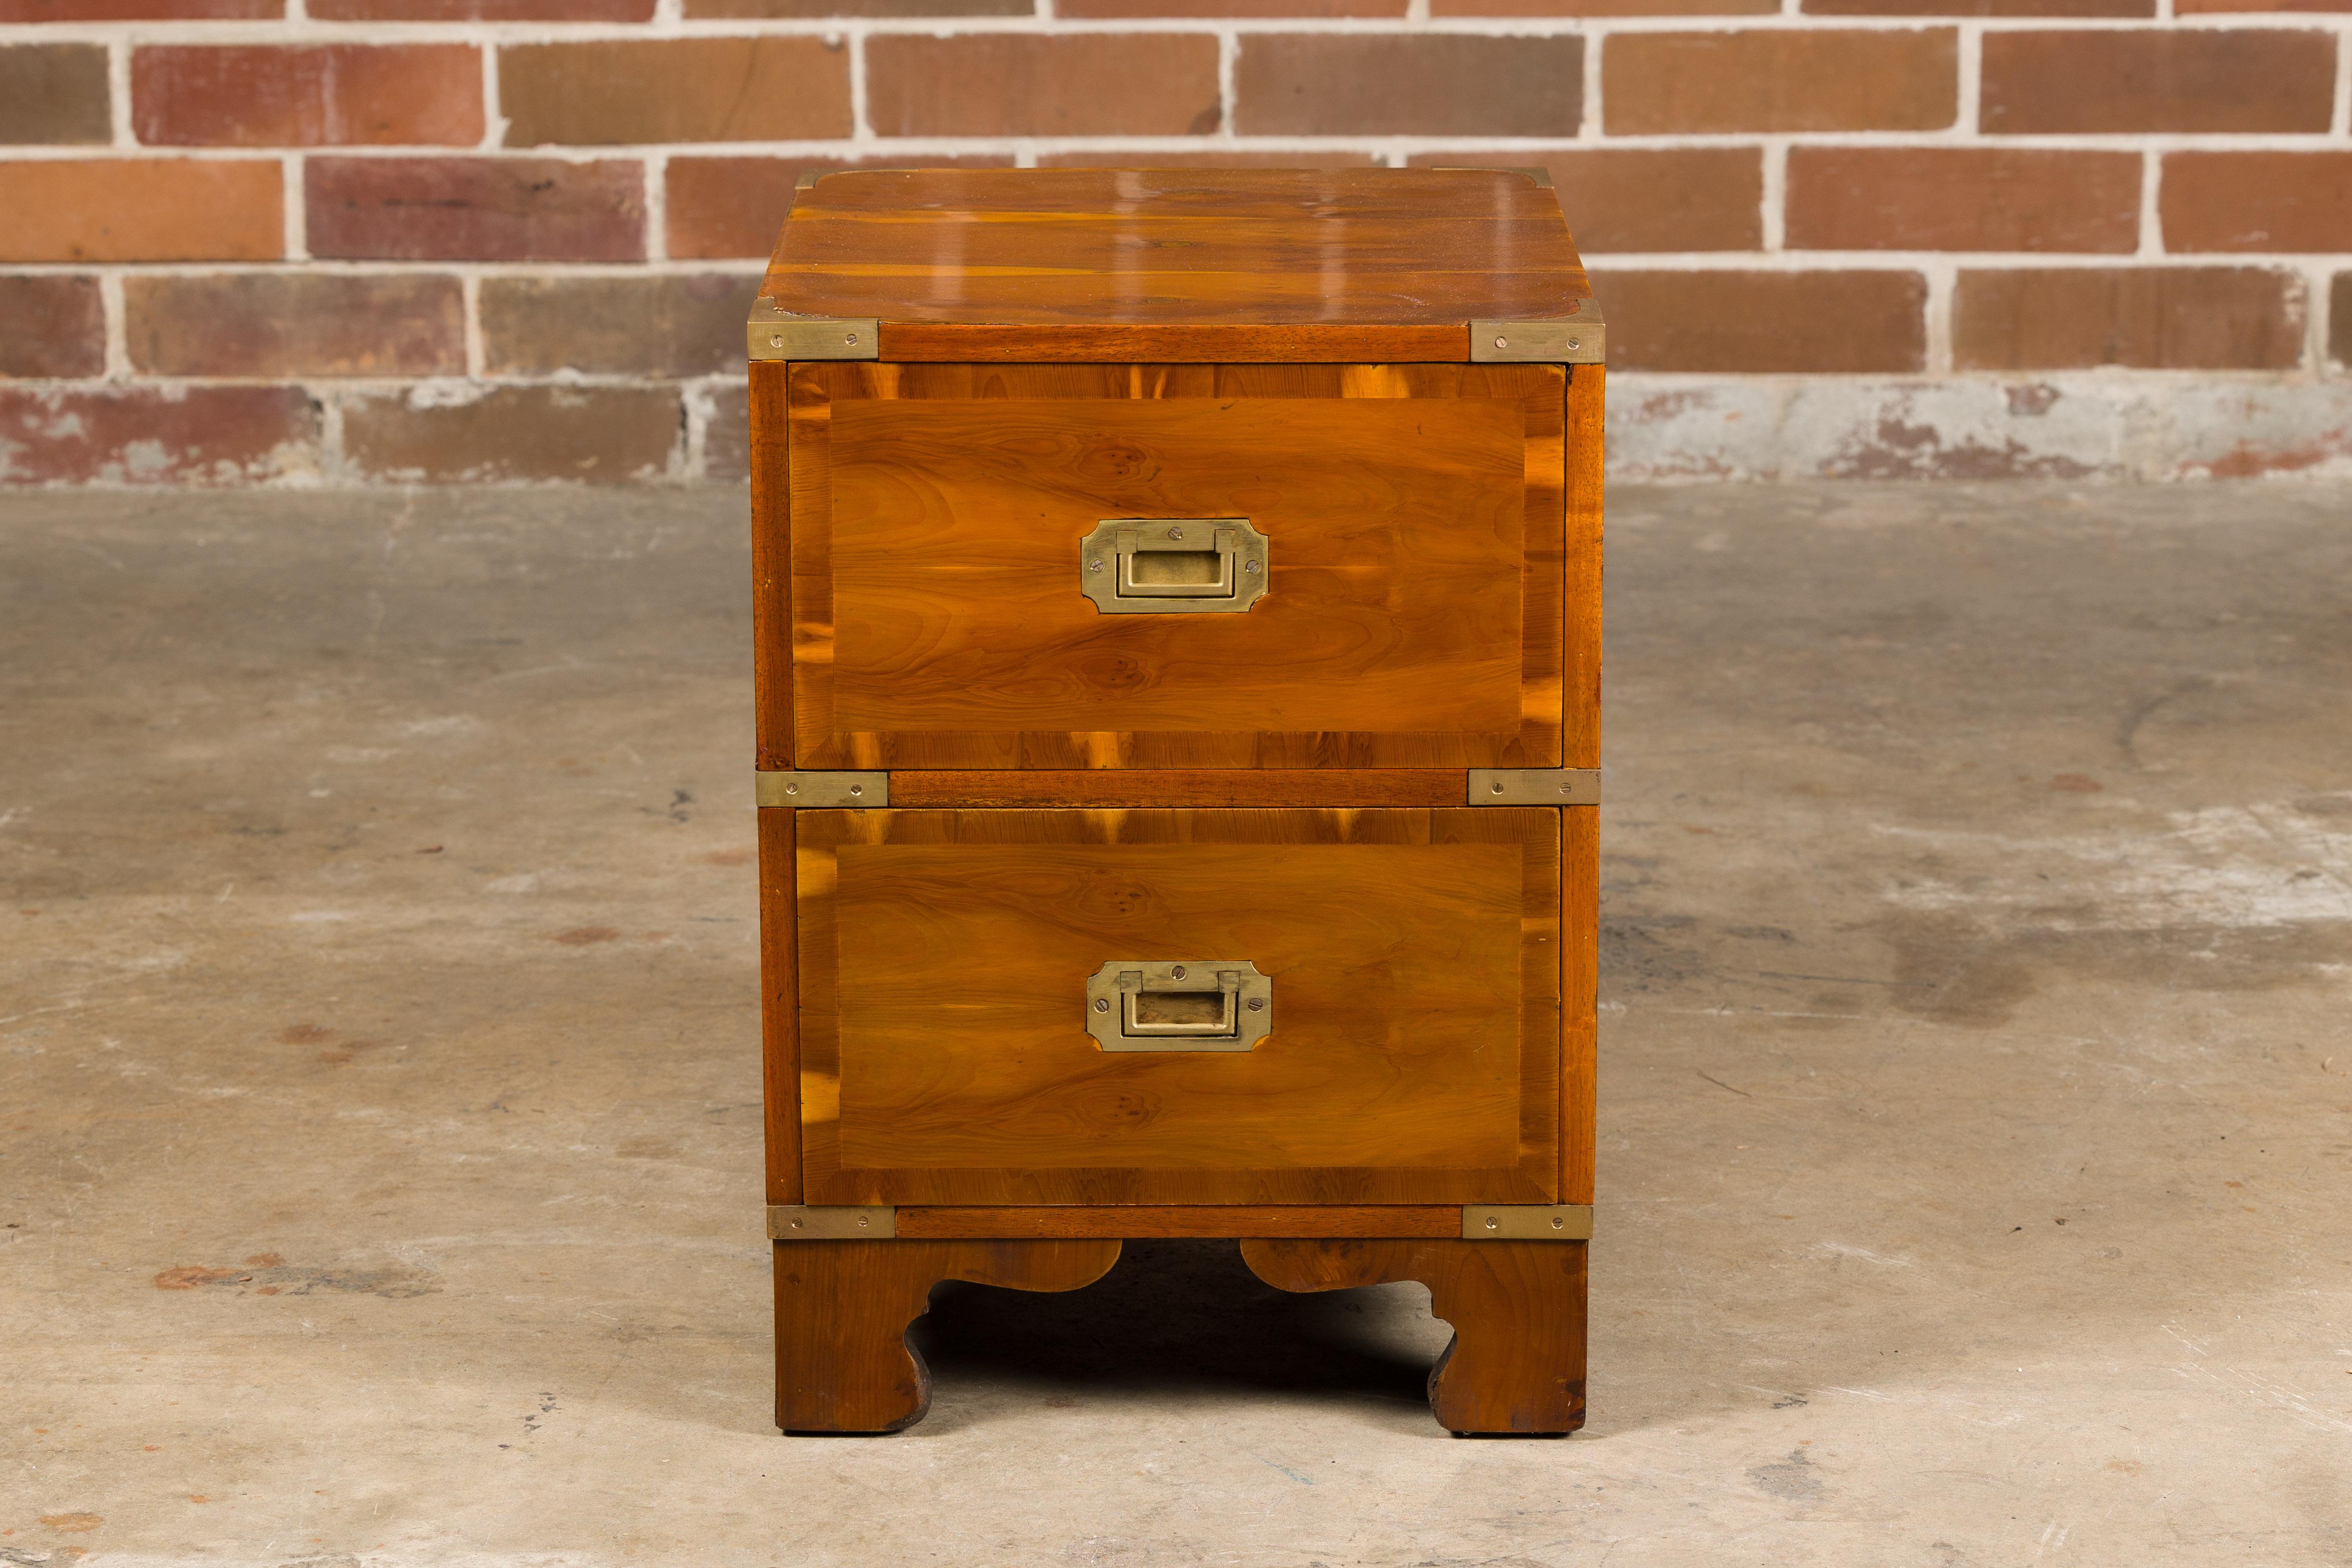 A small English 19th century Campaign chest by Bissitt & Brunton LTD, with two drawers, brass hardware and bracket feet. This charming small English 19th-century Campaign chest, crafted by the renowned Bissitt & Brunton LTD, is a piece brimming with